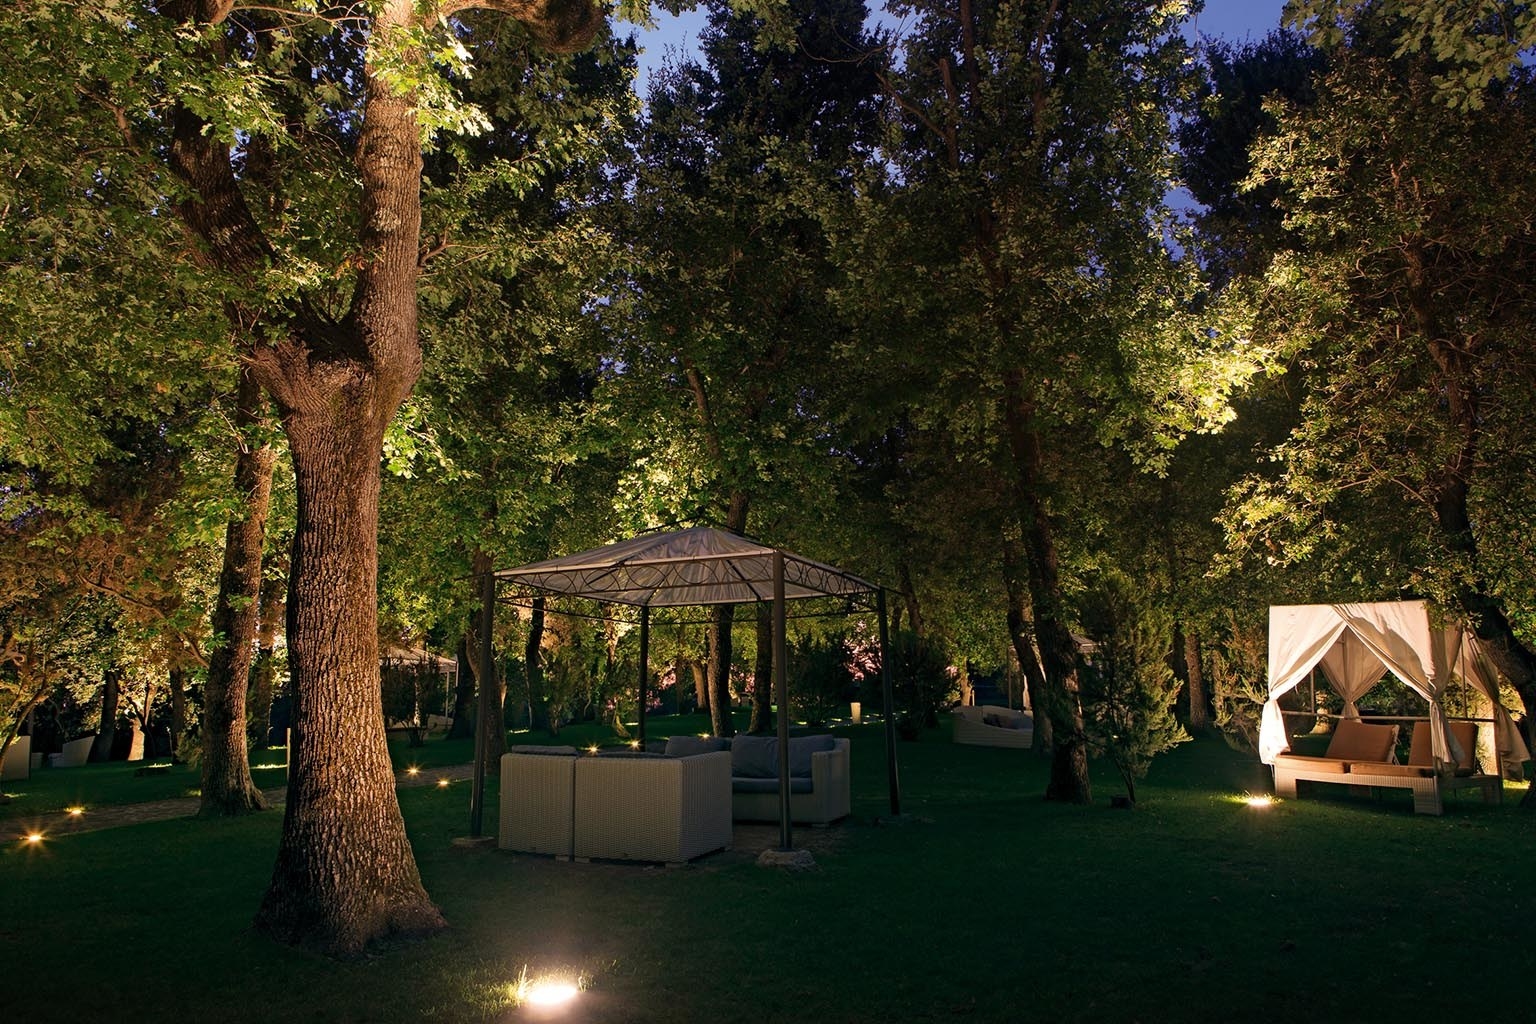 Small cabanas set up among the trees on a grassy lawn at the resort, lit up at night